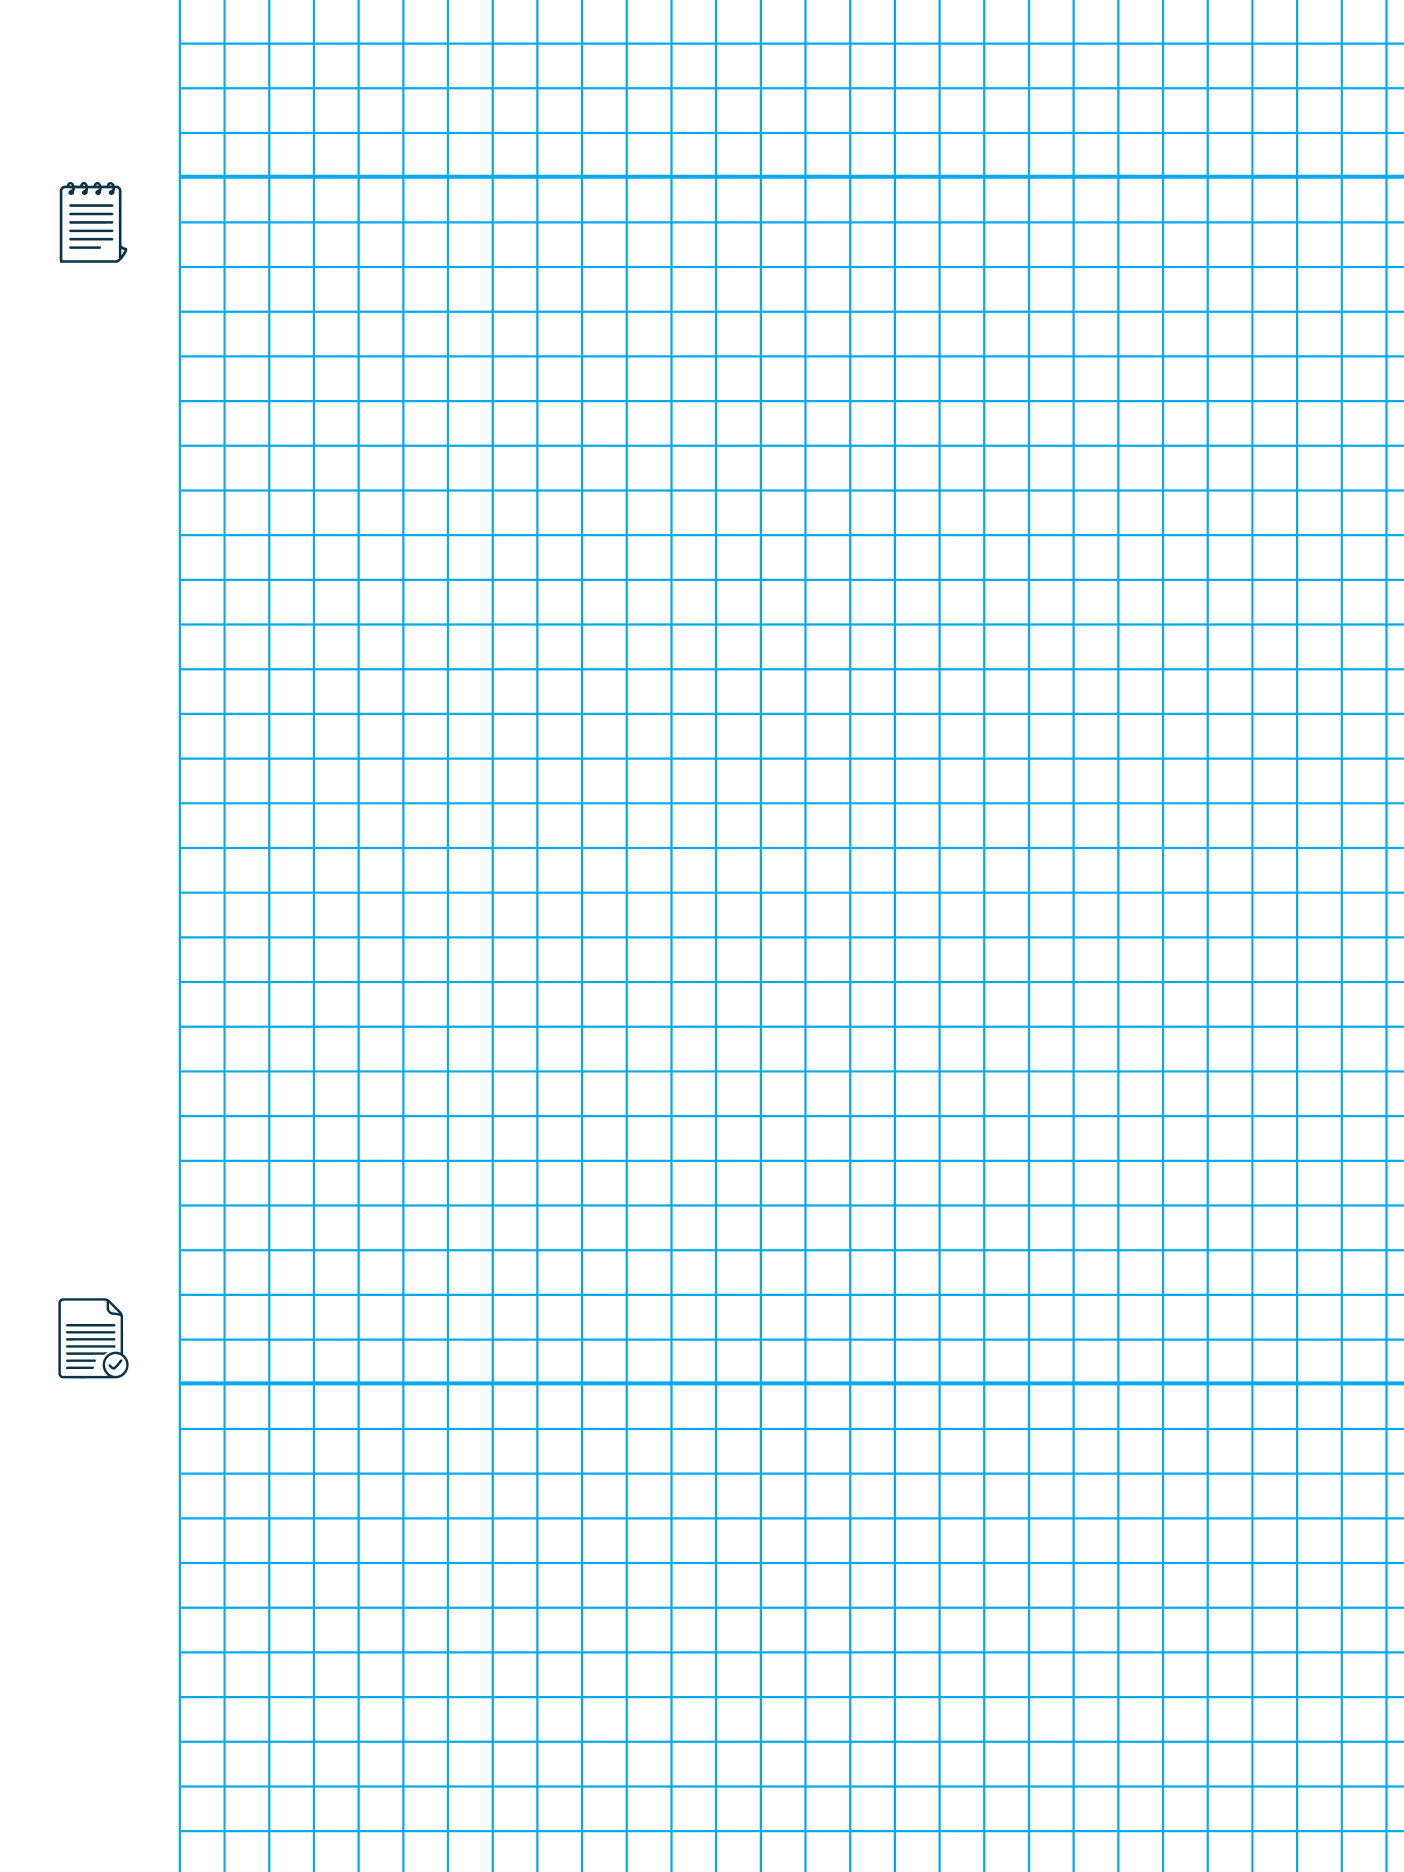 Meeting notes - icon based - 5 mm grid at 227 DPI - second page - 1404x1872.png